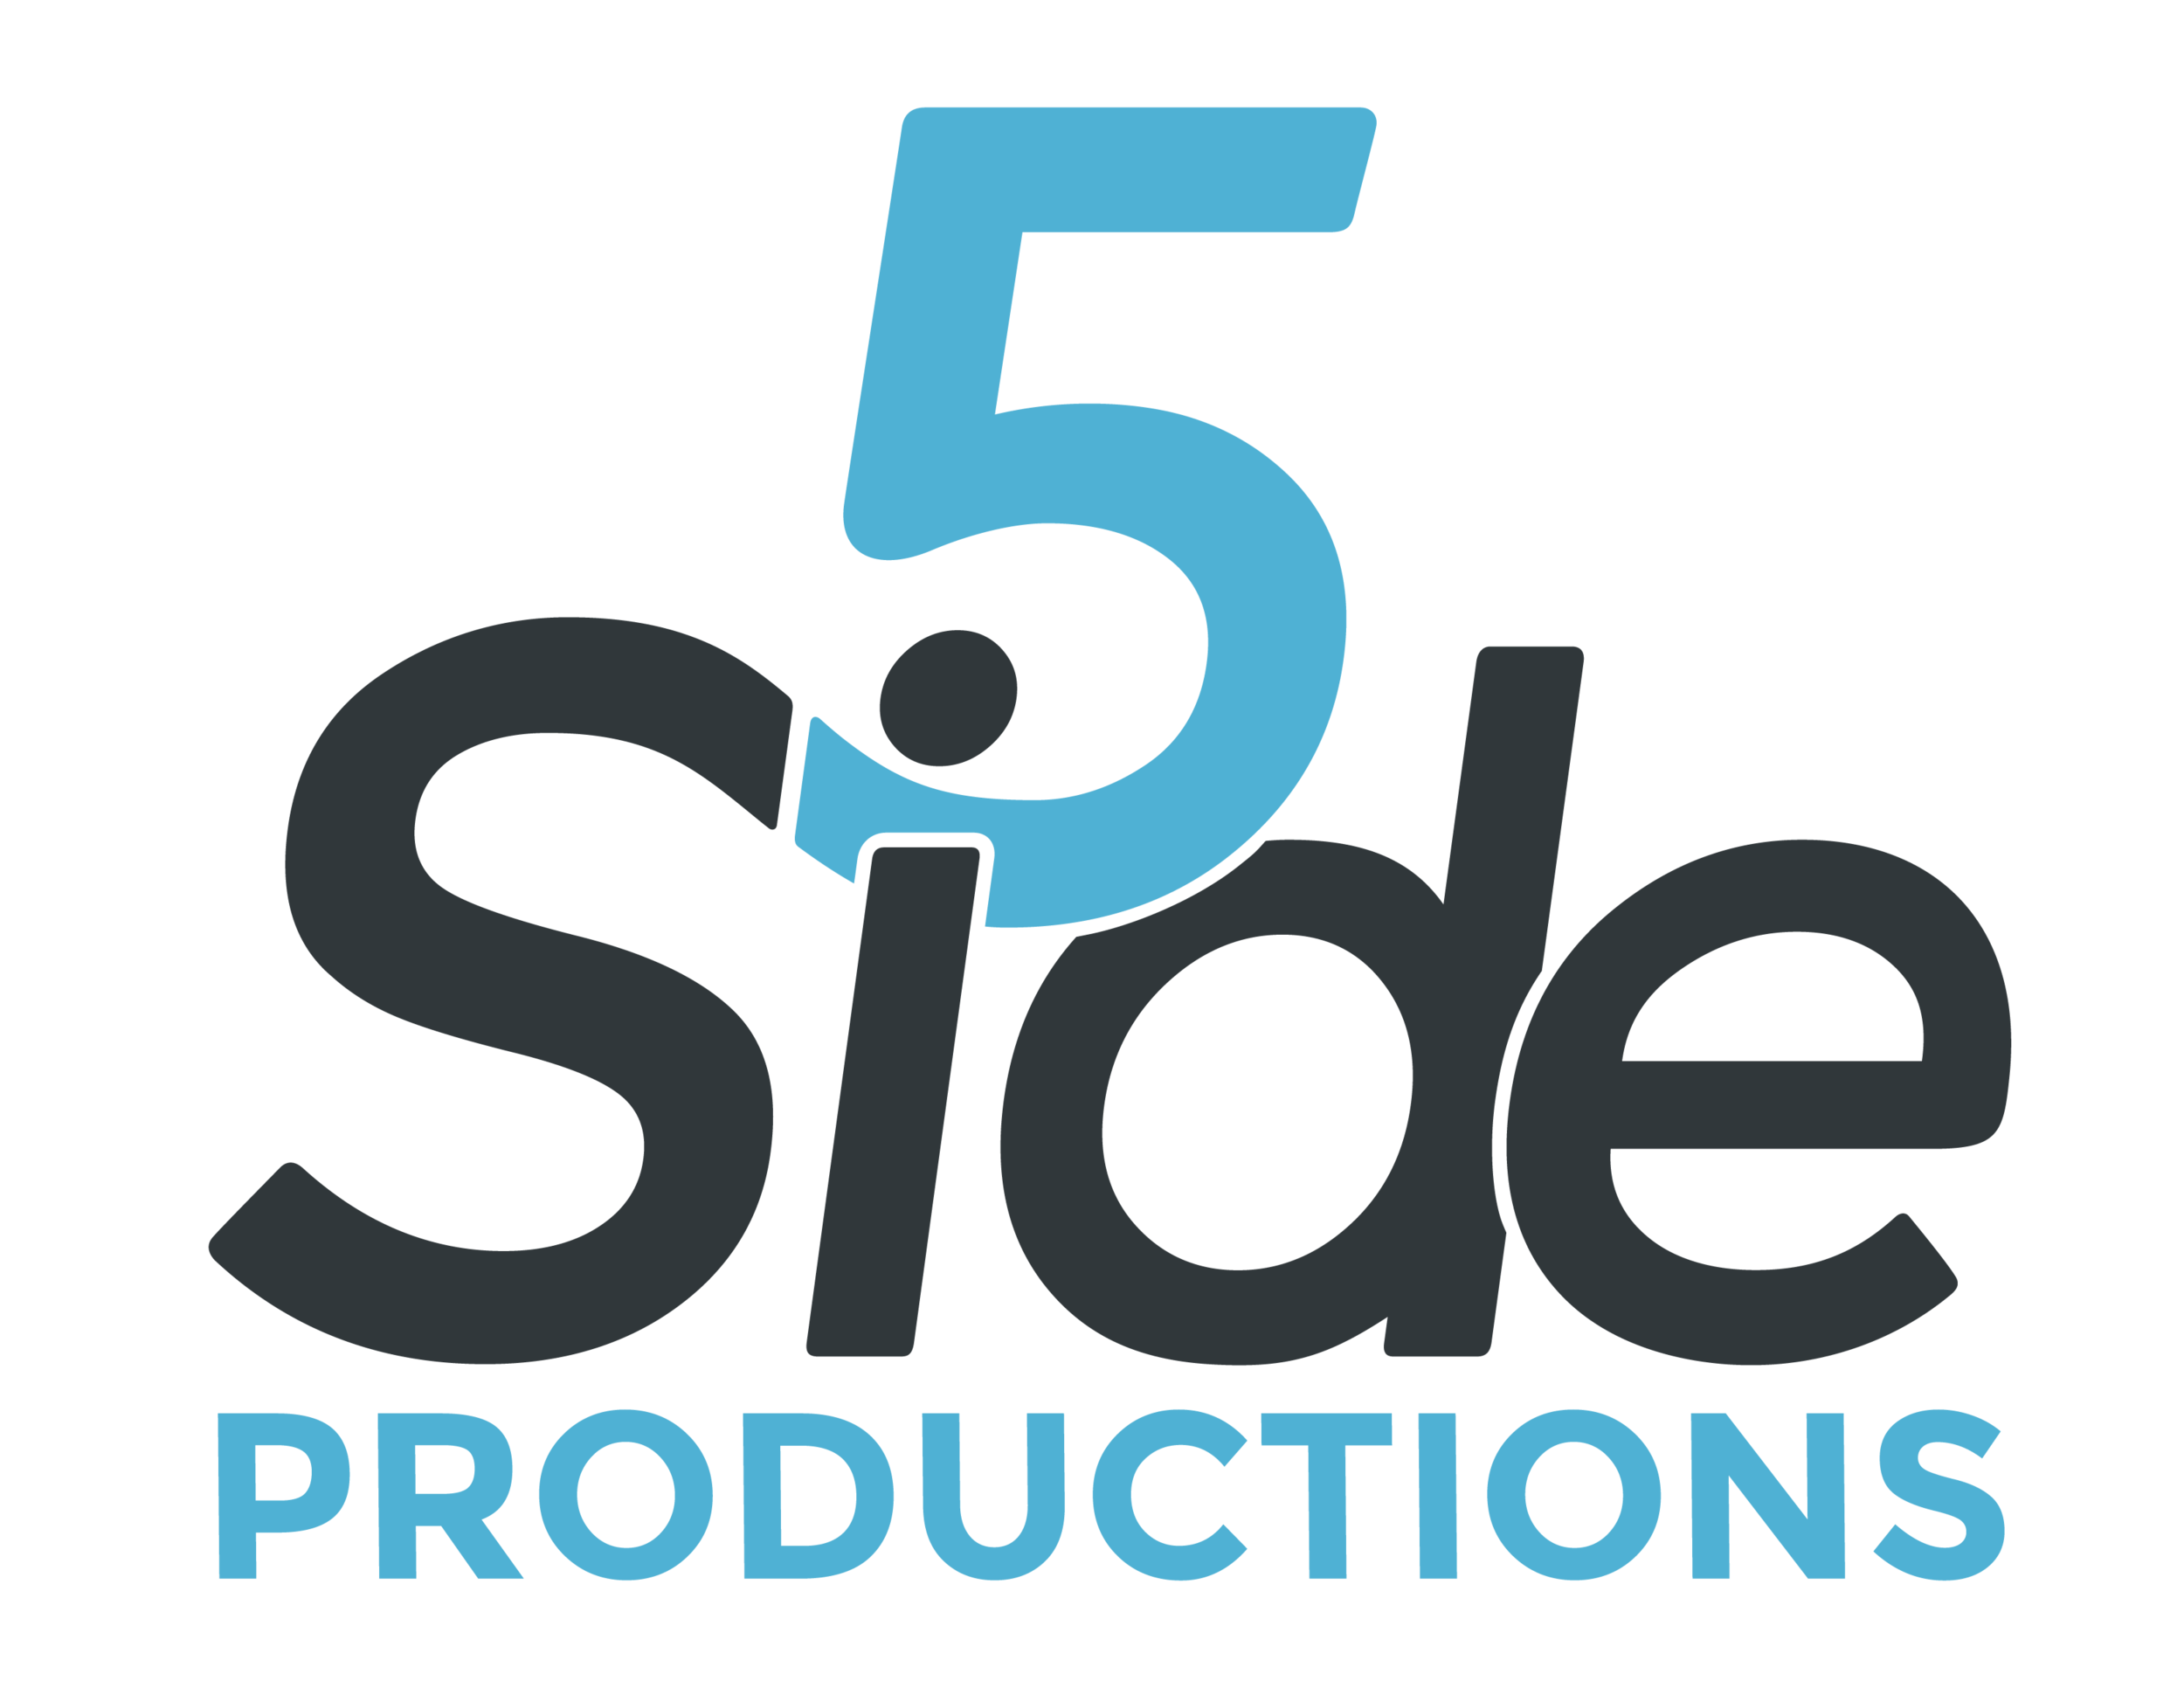 5 Side Productions